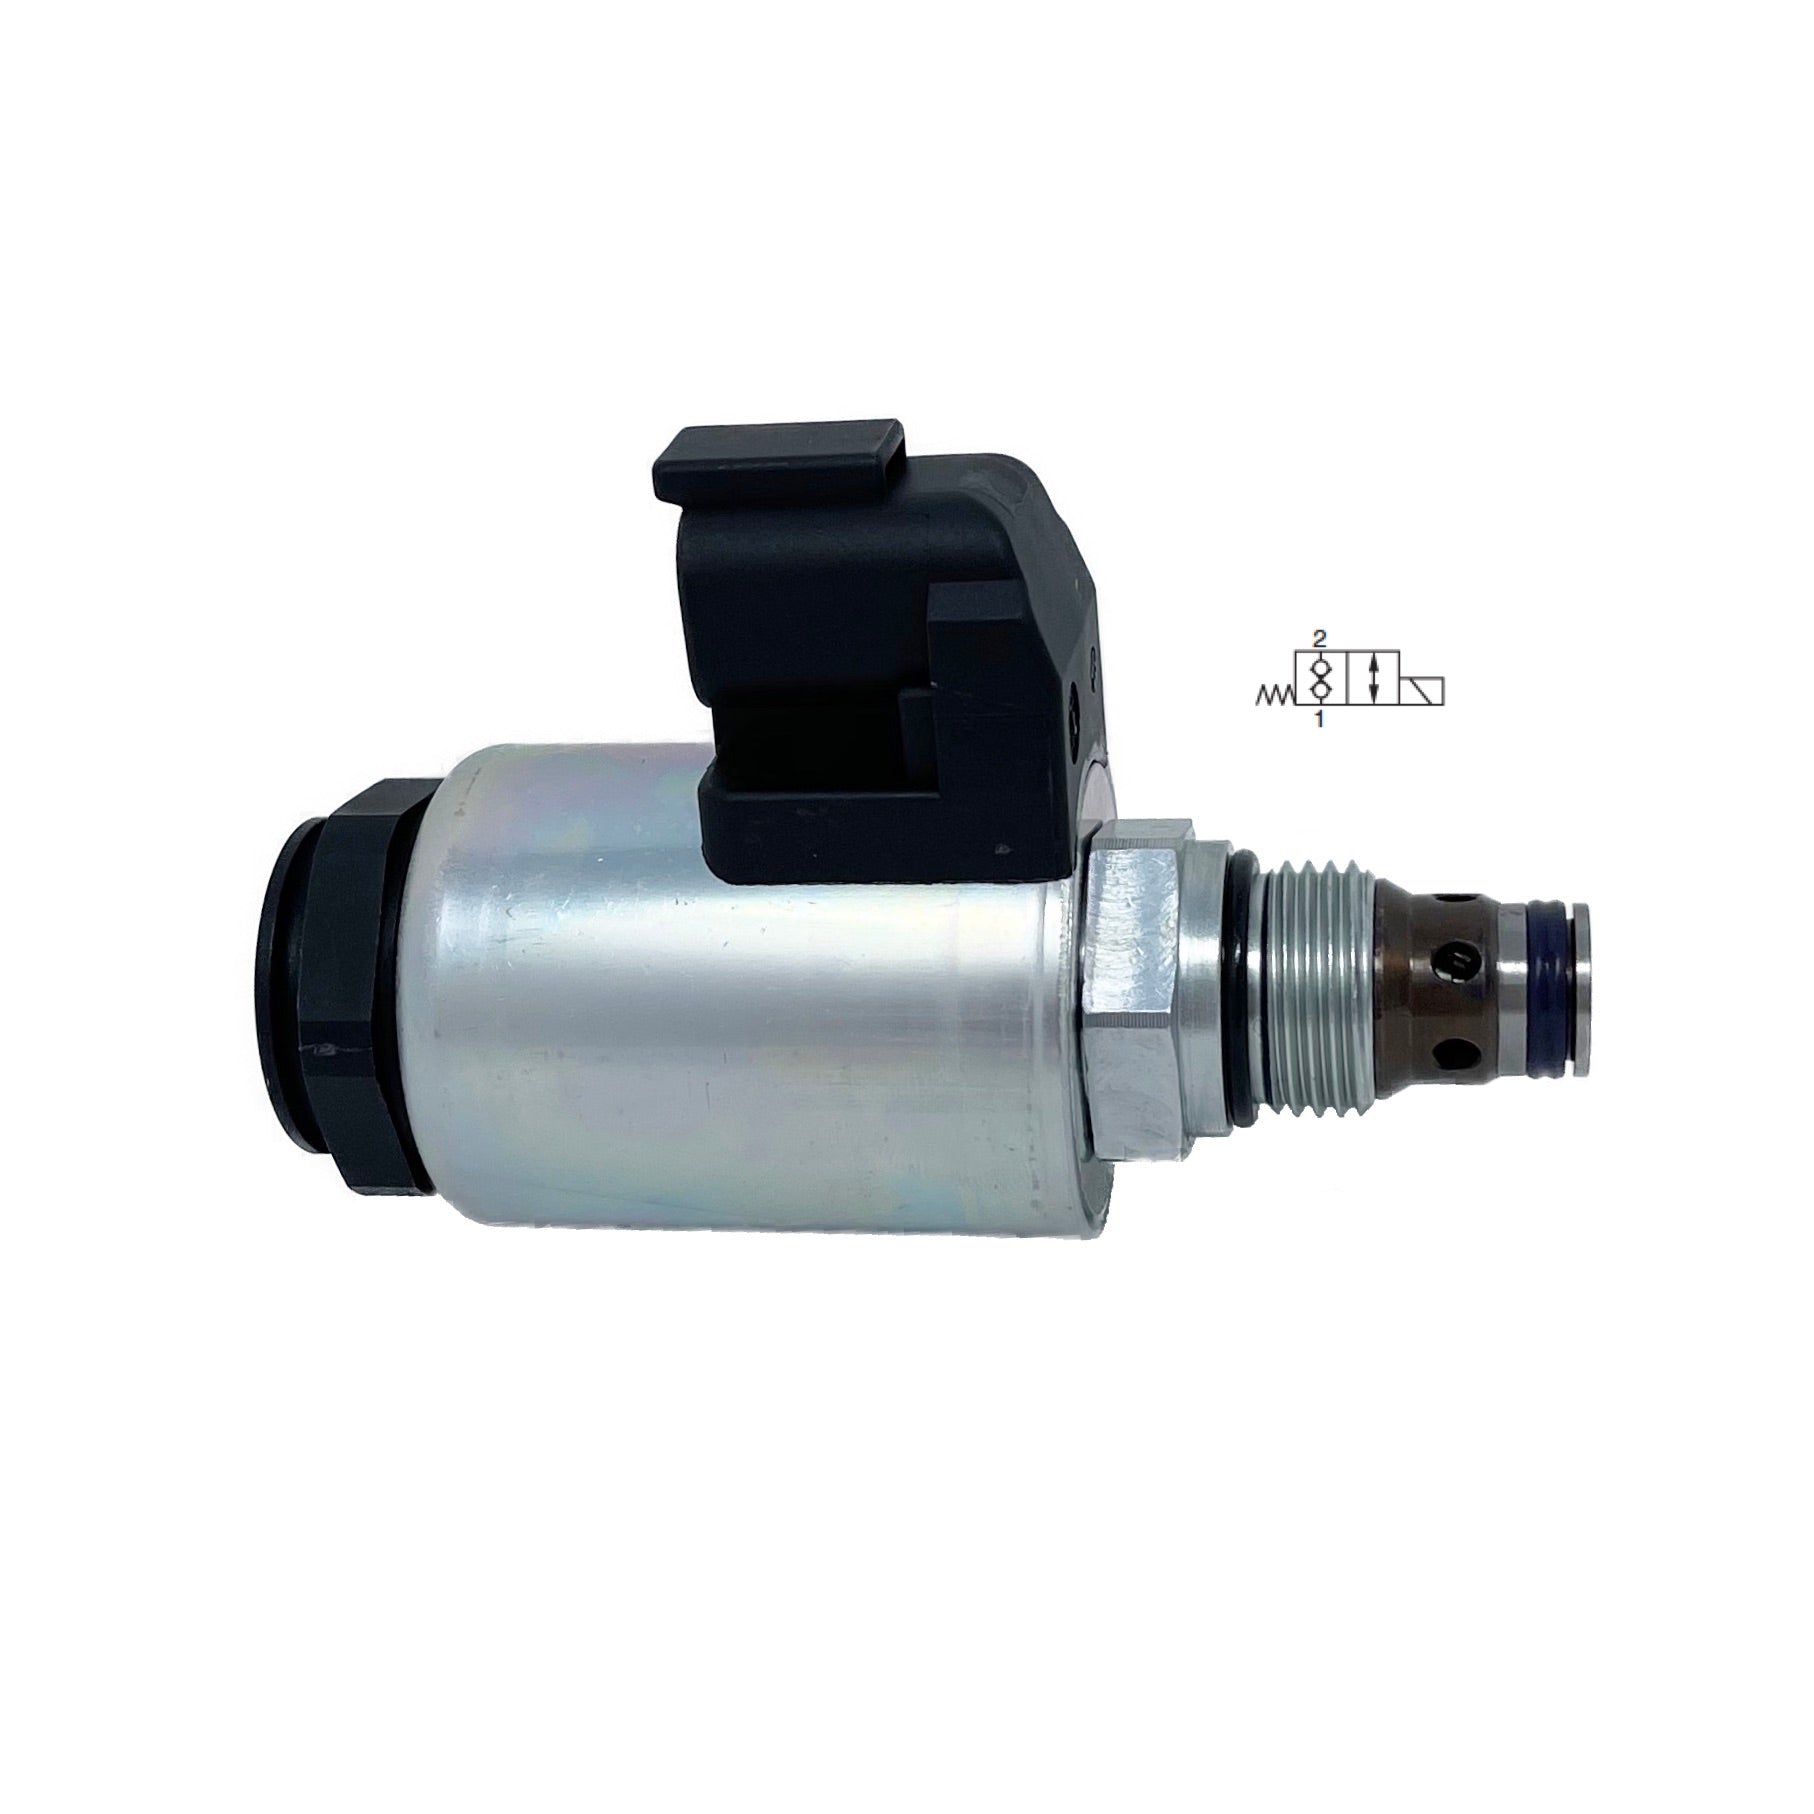 SD1E-A2/H2S5A-12DT : Argo DCV, 8GPM, 5100psi, 2P2W, C-8-2, 12 VDC Deutsch, Check 1 to 2 Neutral